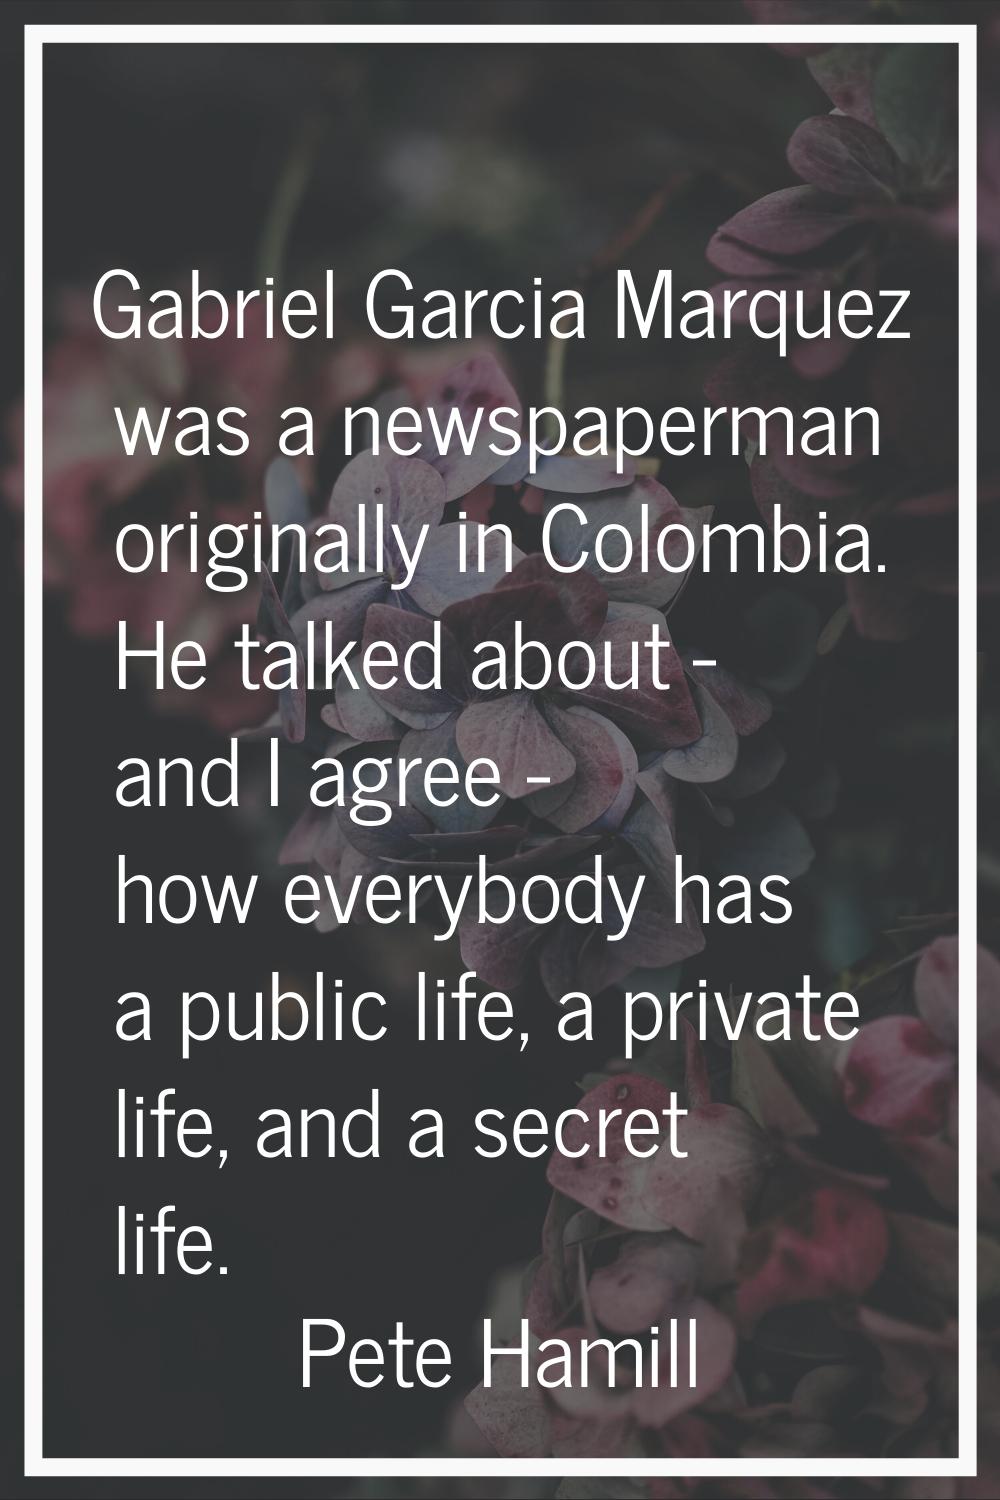 Gabriel Garcia Marquez was a newspaperman originally in Colombia. He talked about - and I agree - h